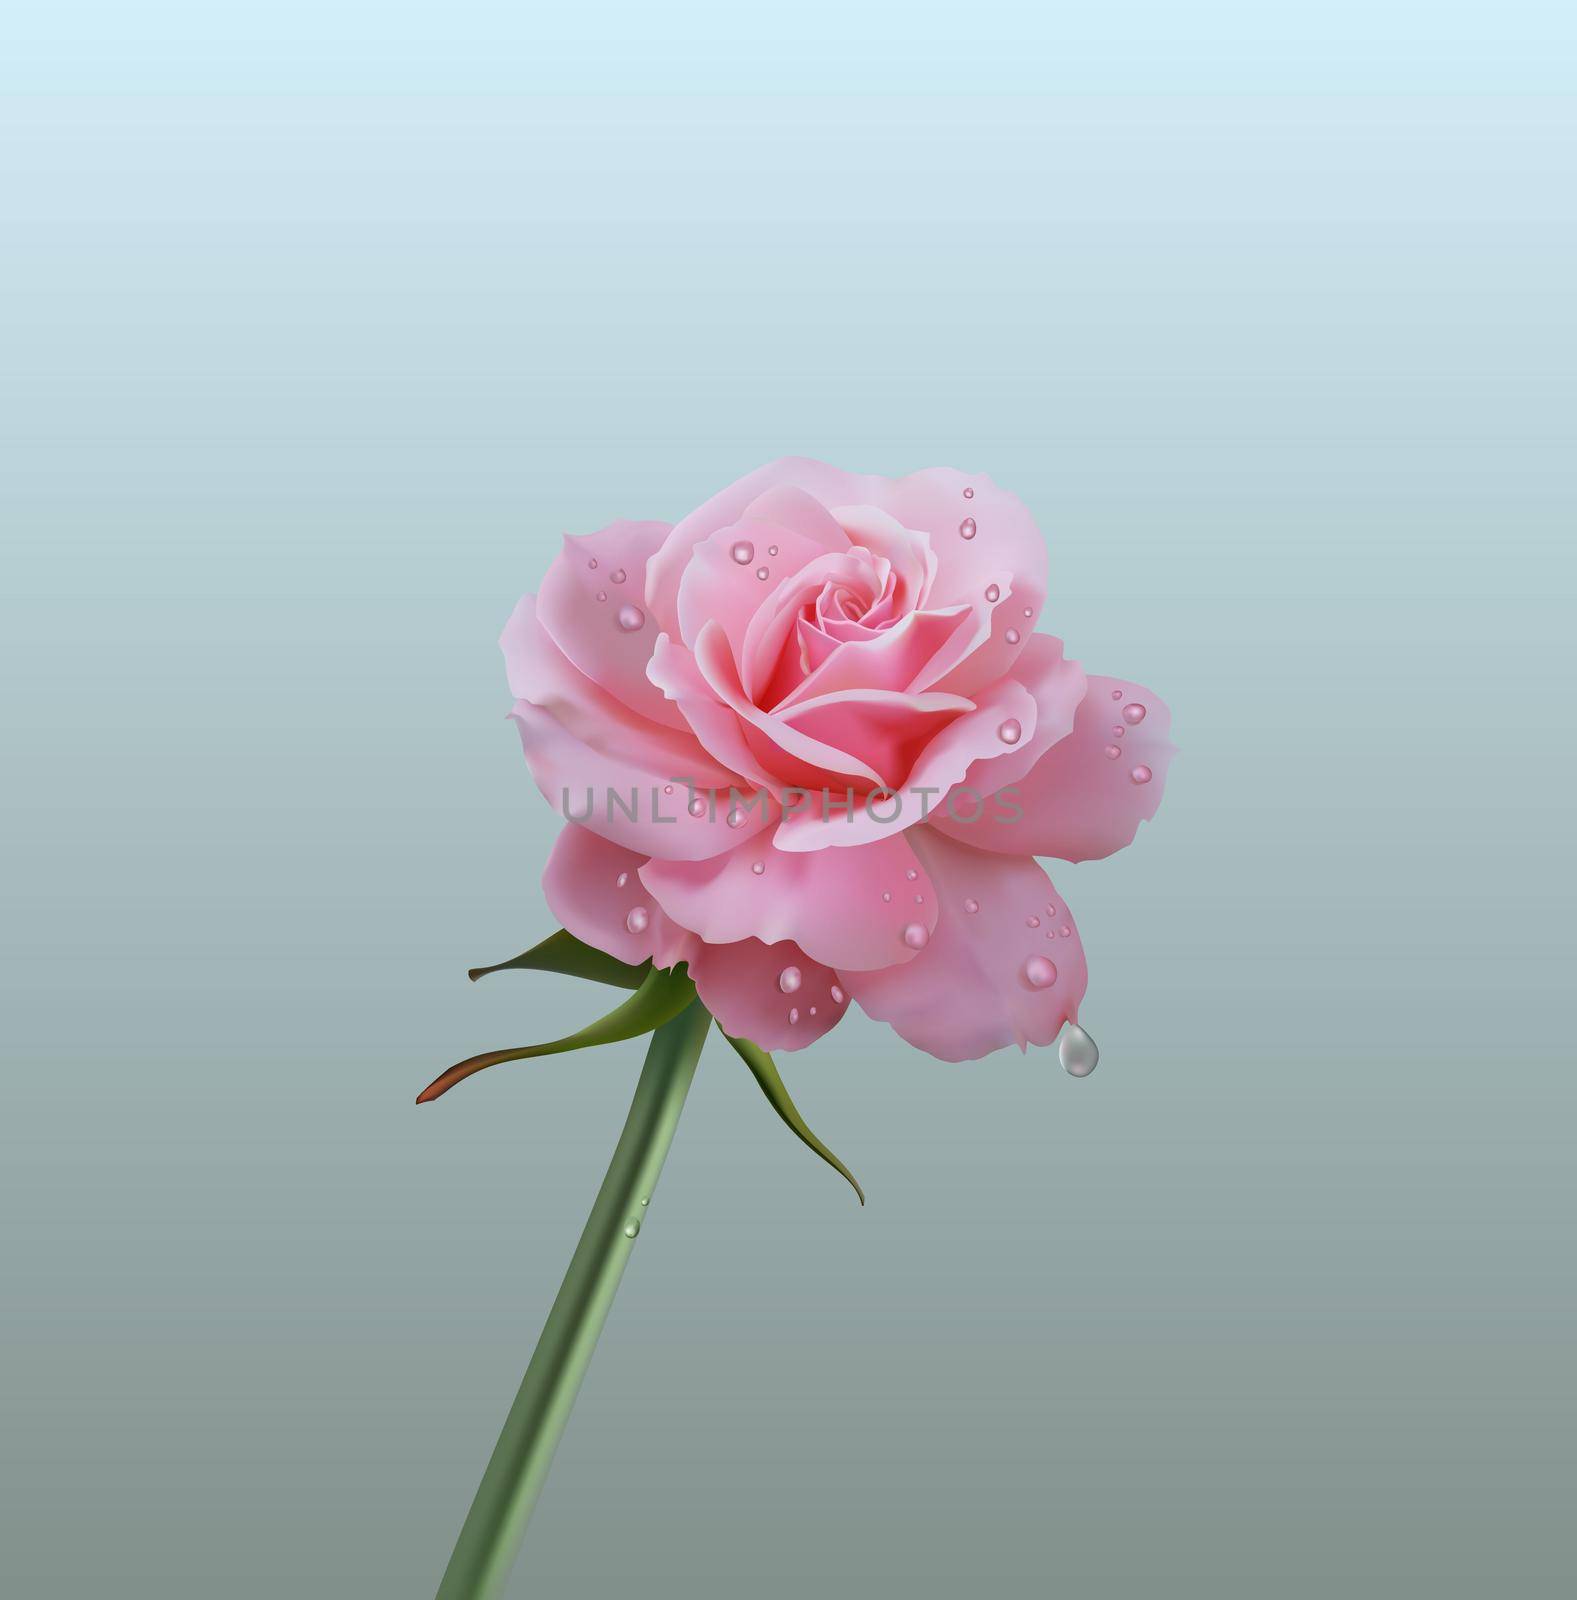 Realistic pink rose on white by mlanaa